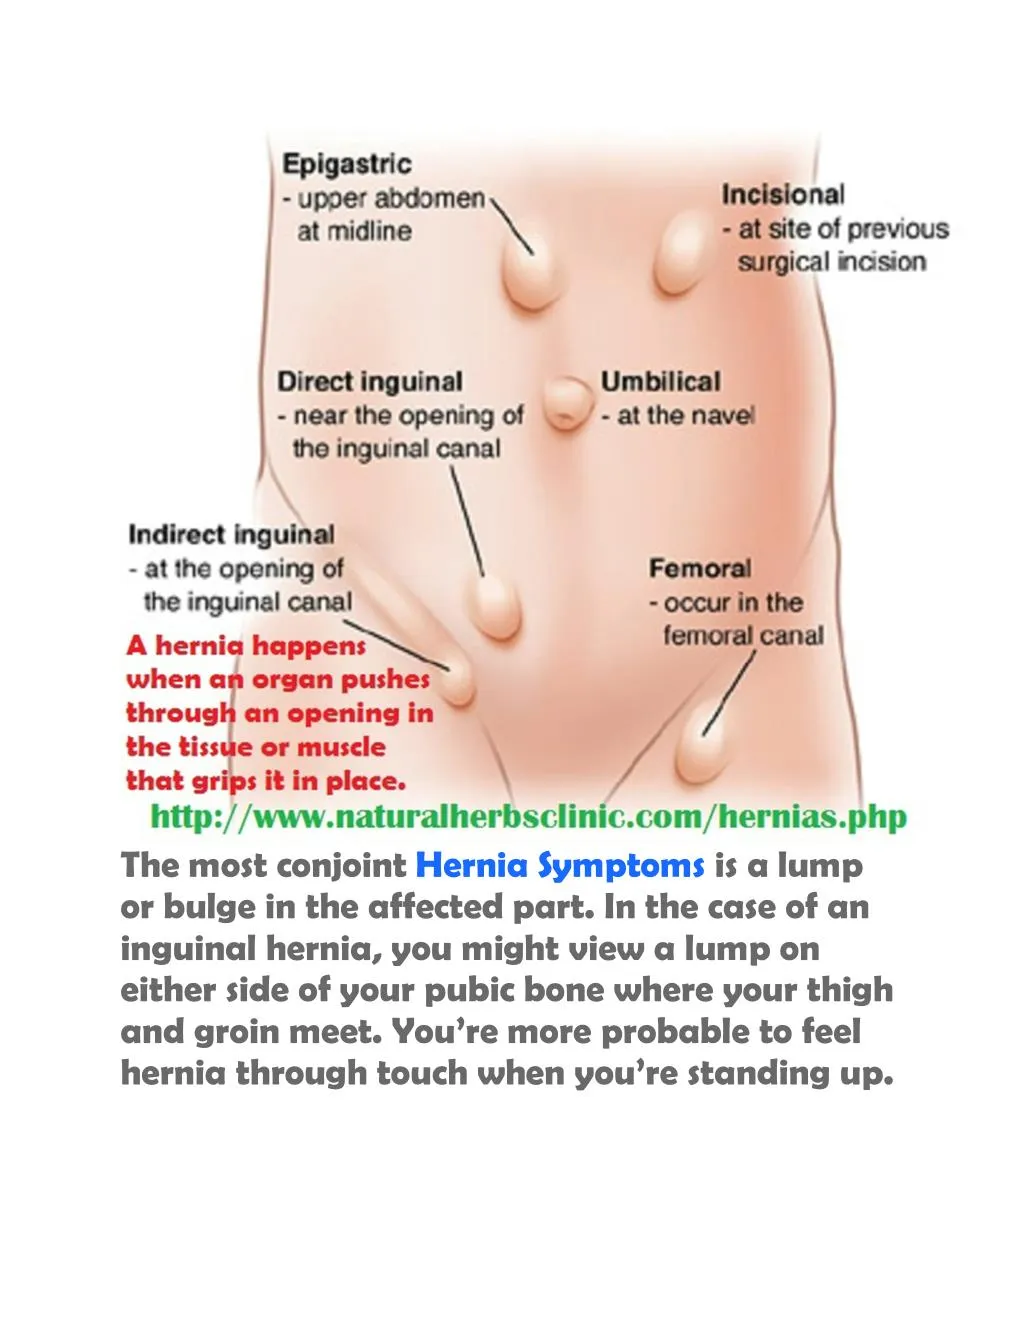 the most conjoint hernia symptoms is a lump